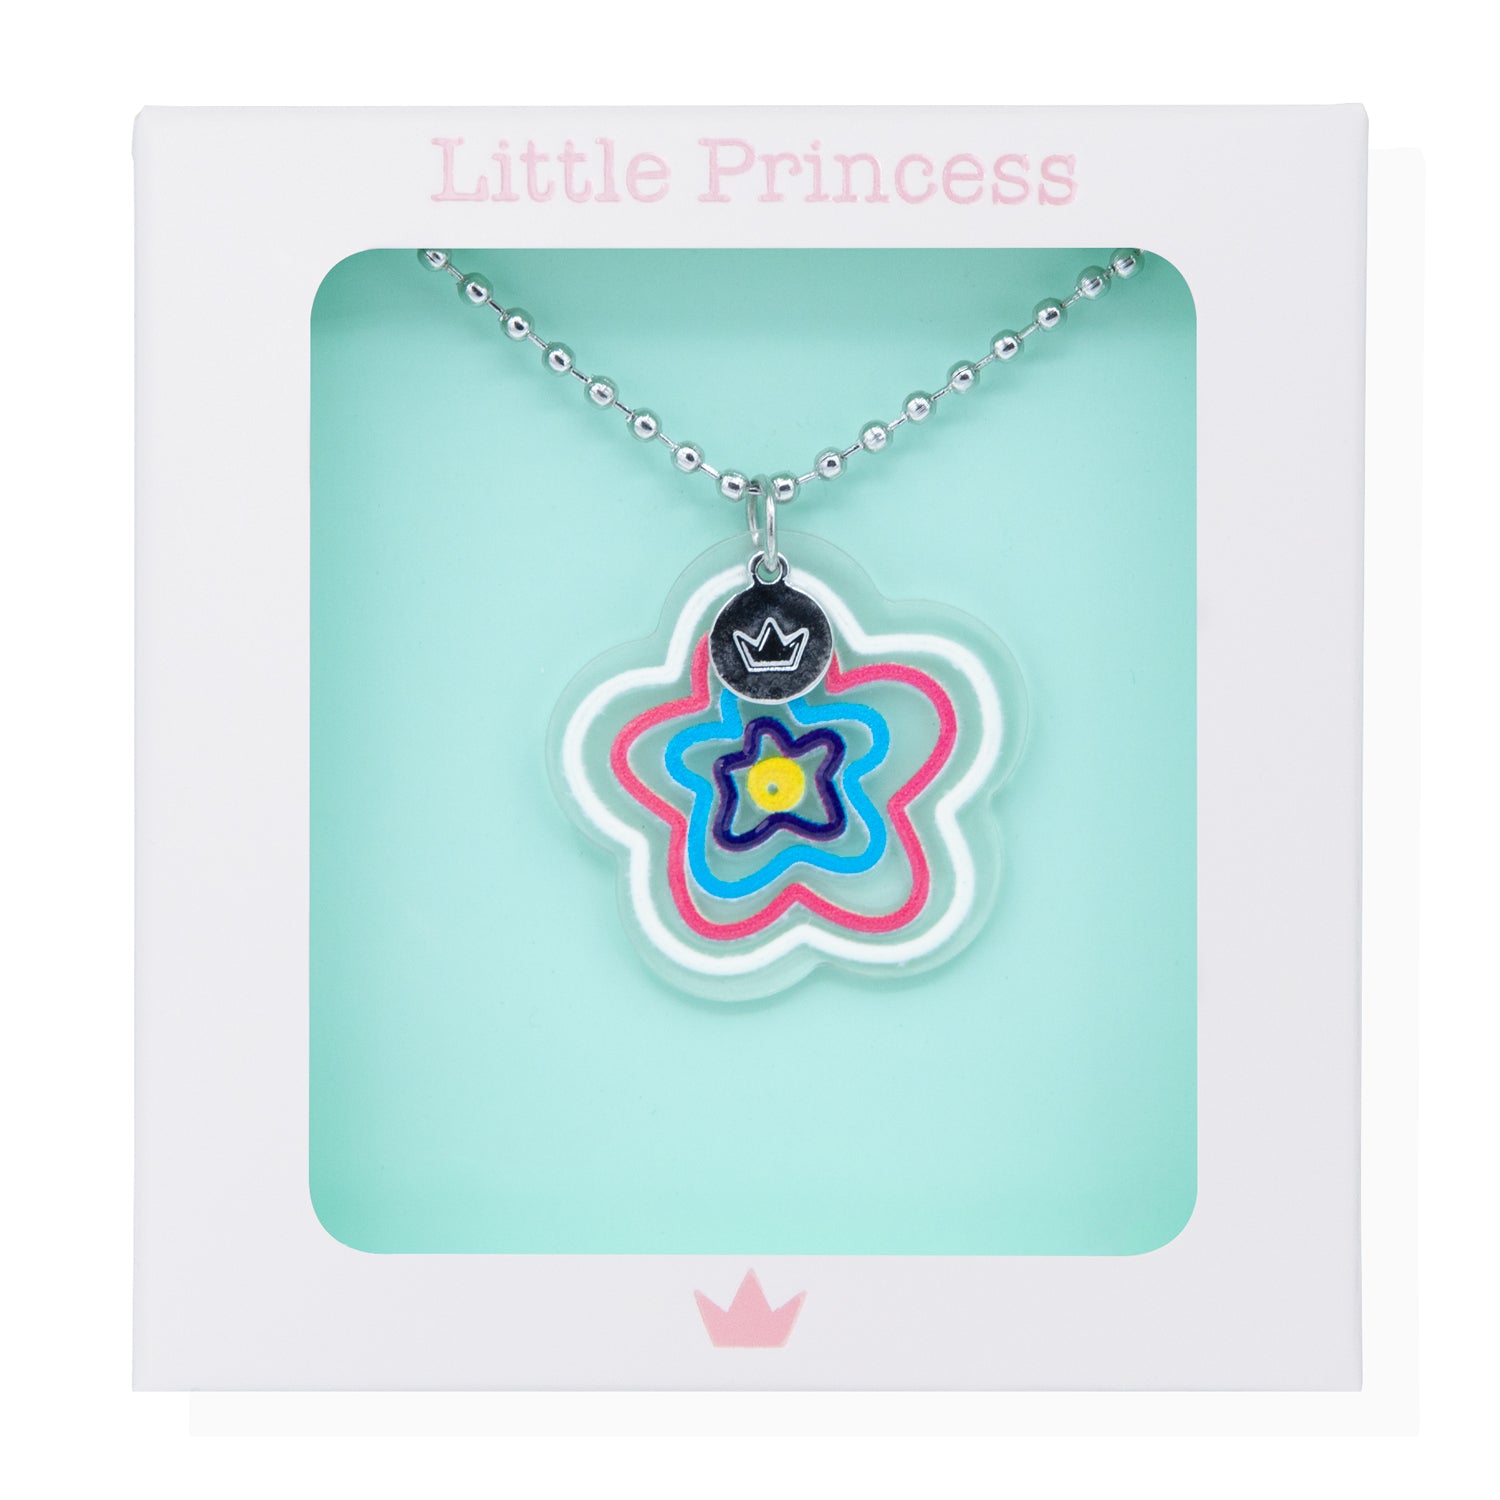 Sofia the First Amulet Reproduction & Elena Princess Necklace Girl Gift  Pendants | eBay